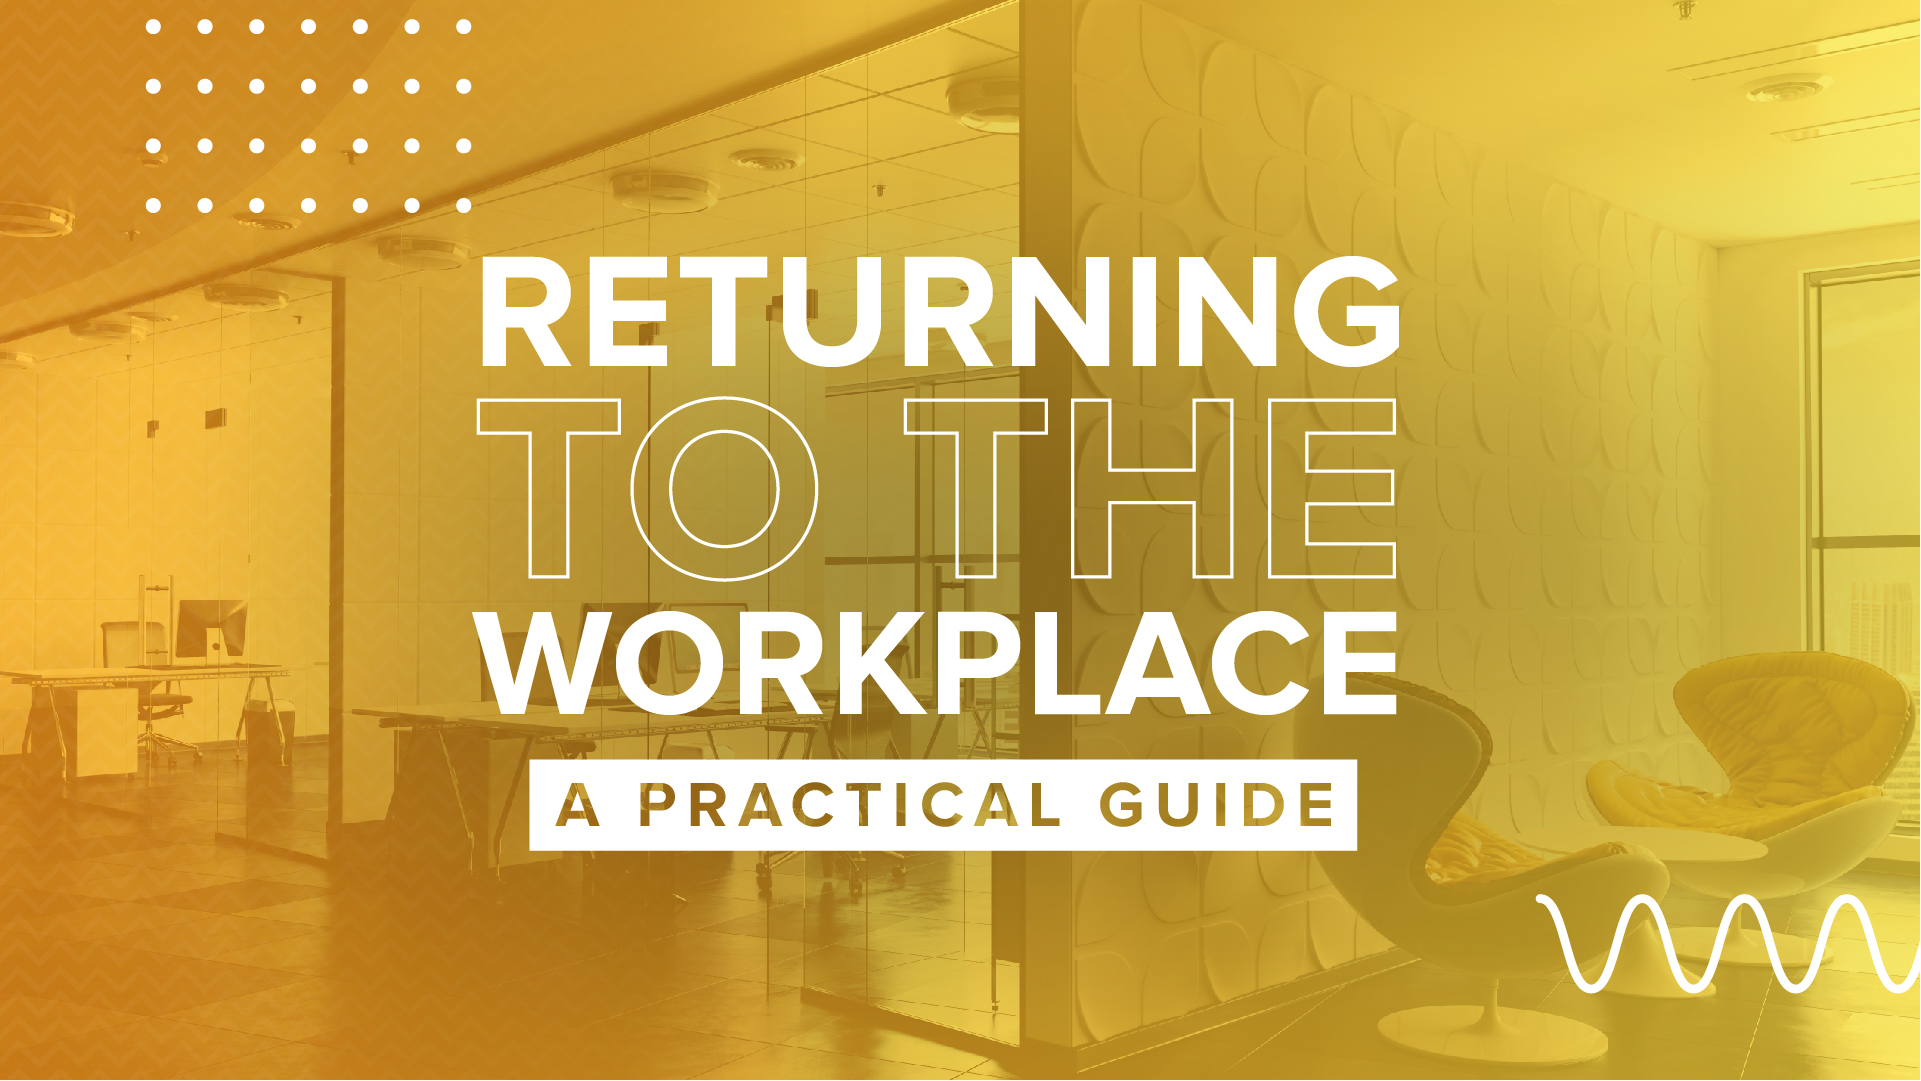 A Practical Guide For Returning To Work